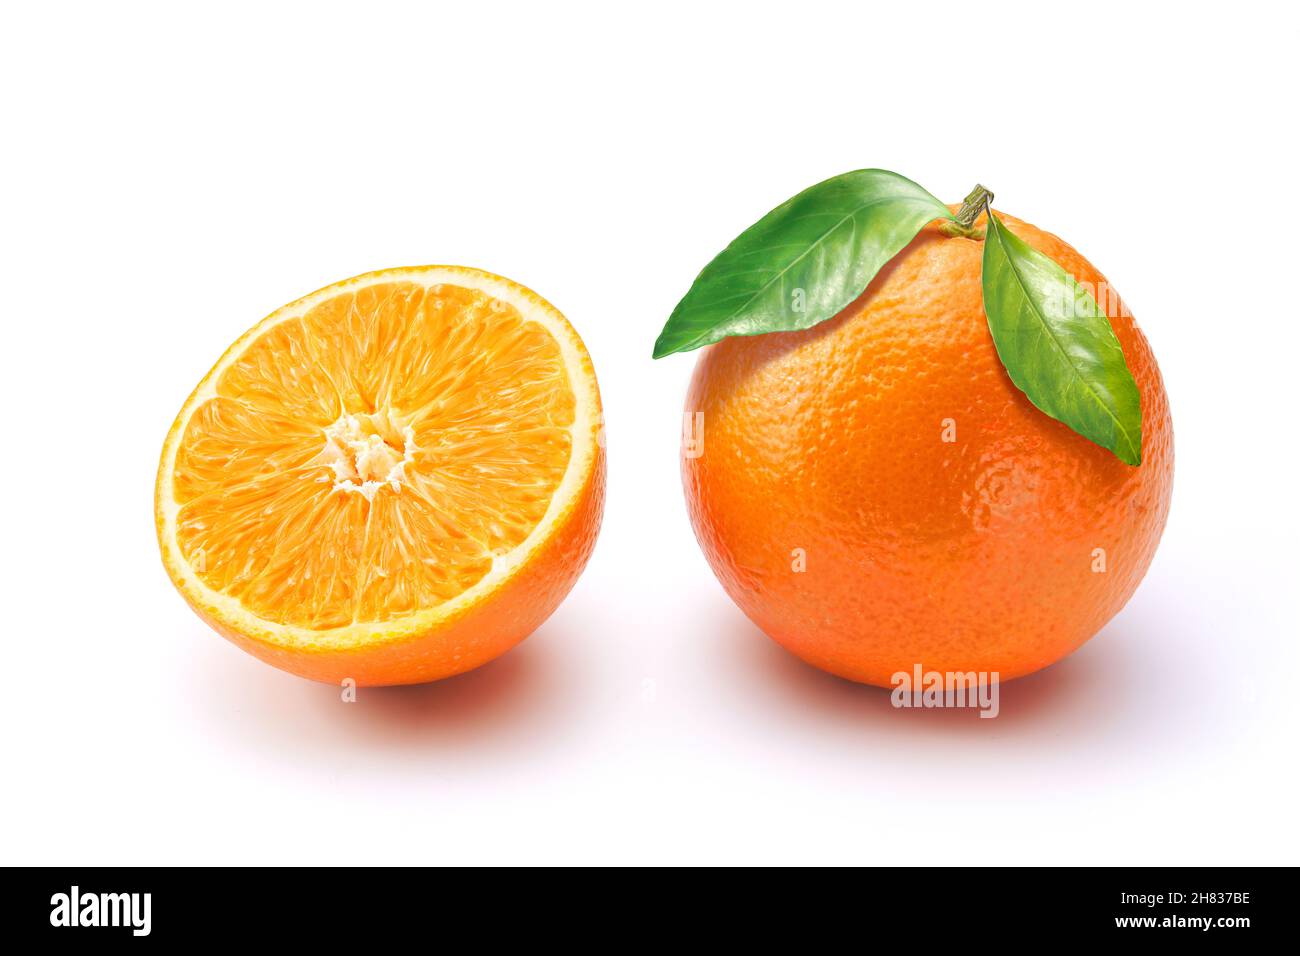 Oranges on white background. One whole with leaves and a half. Stock Photo